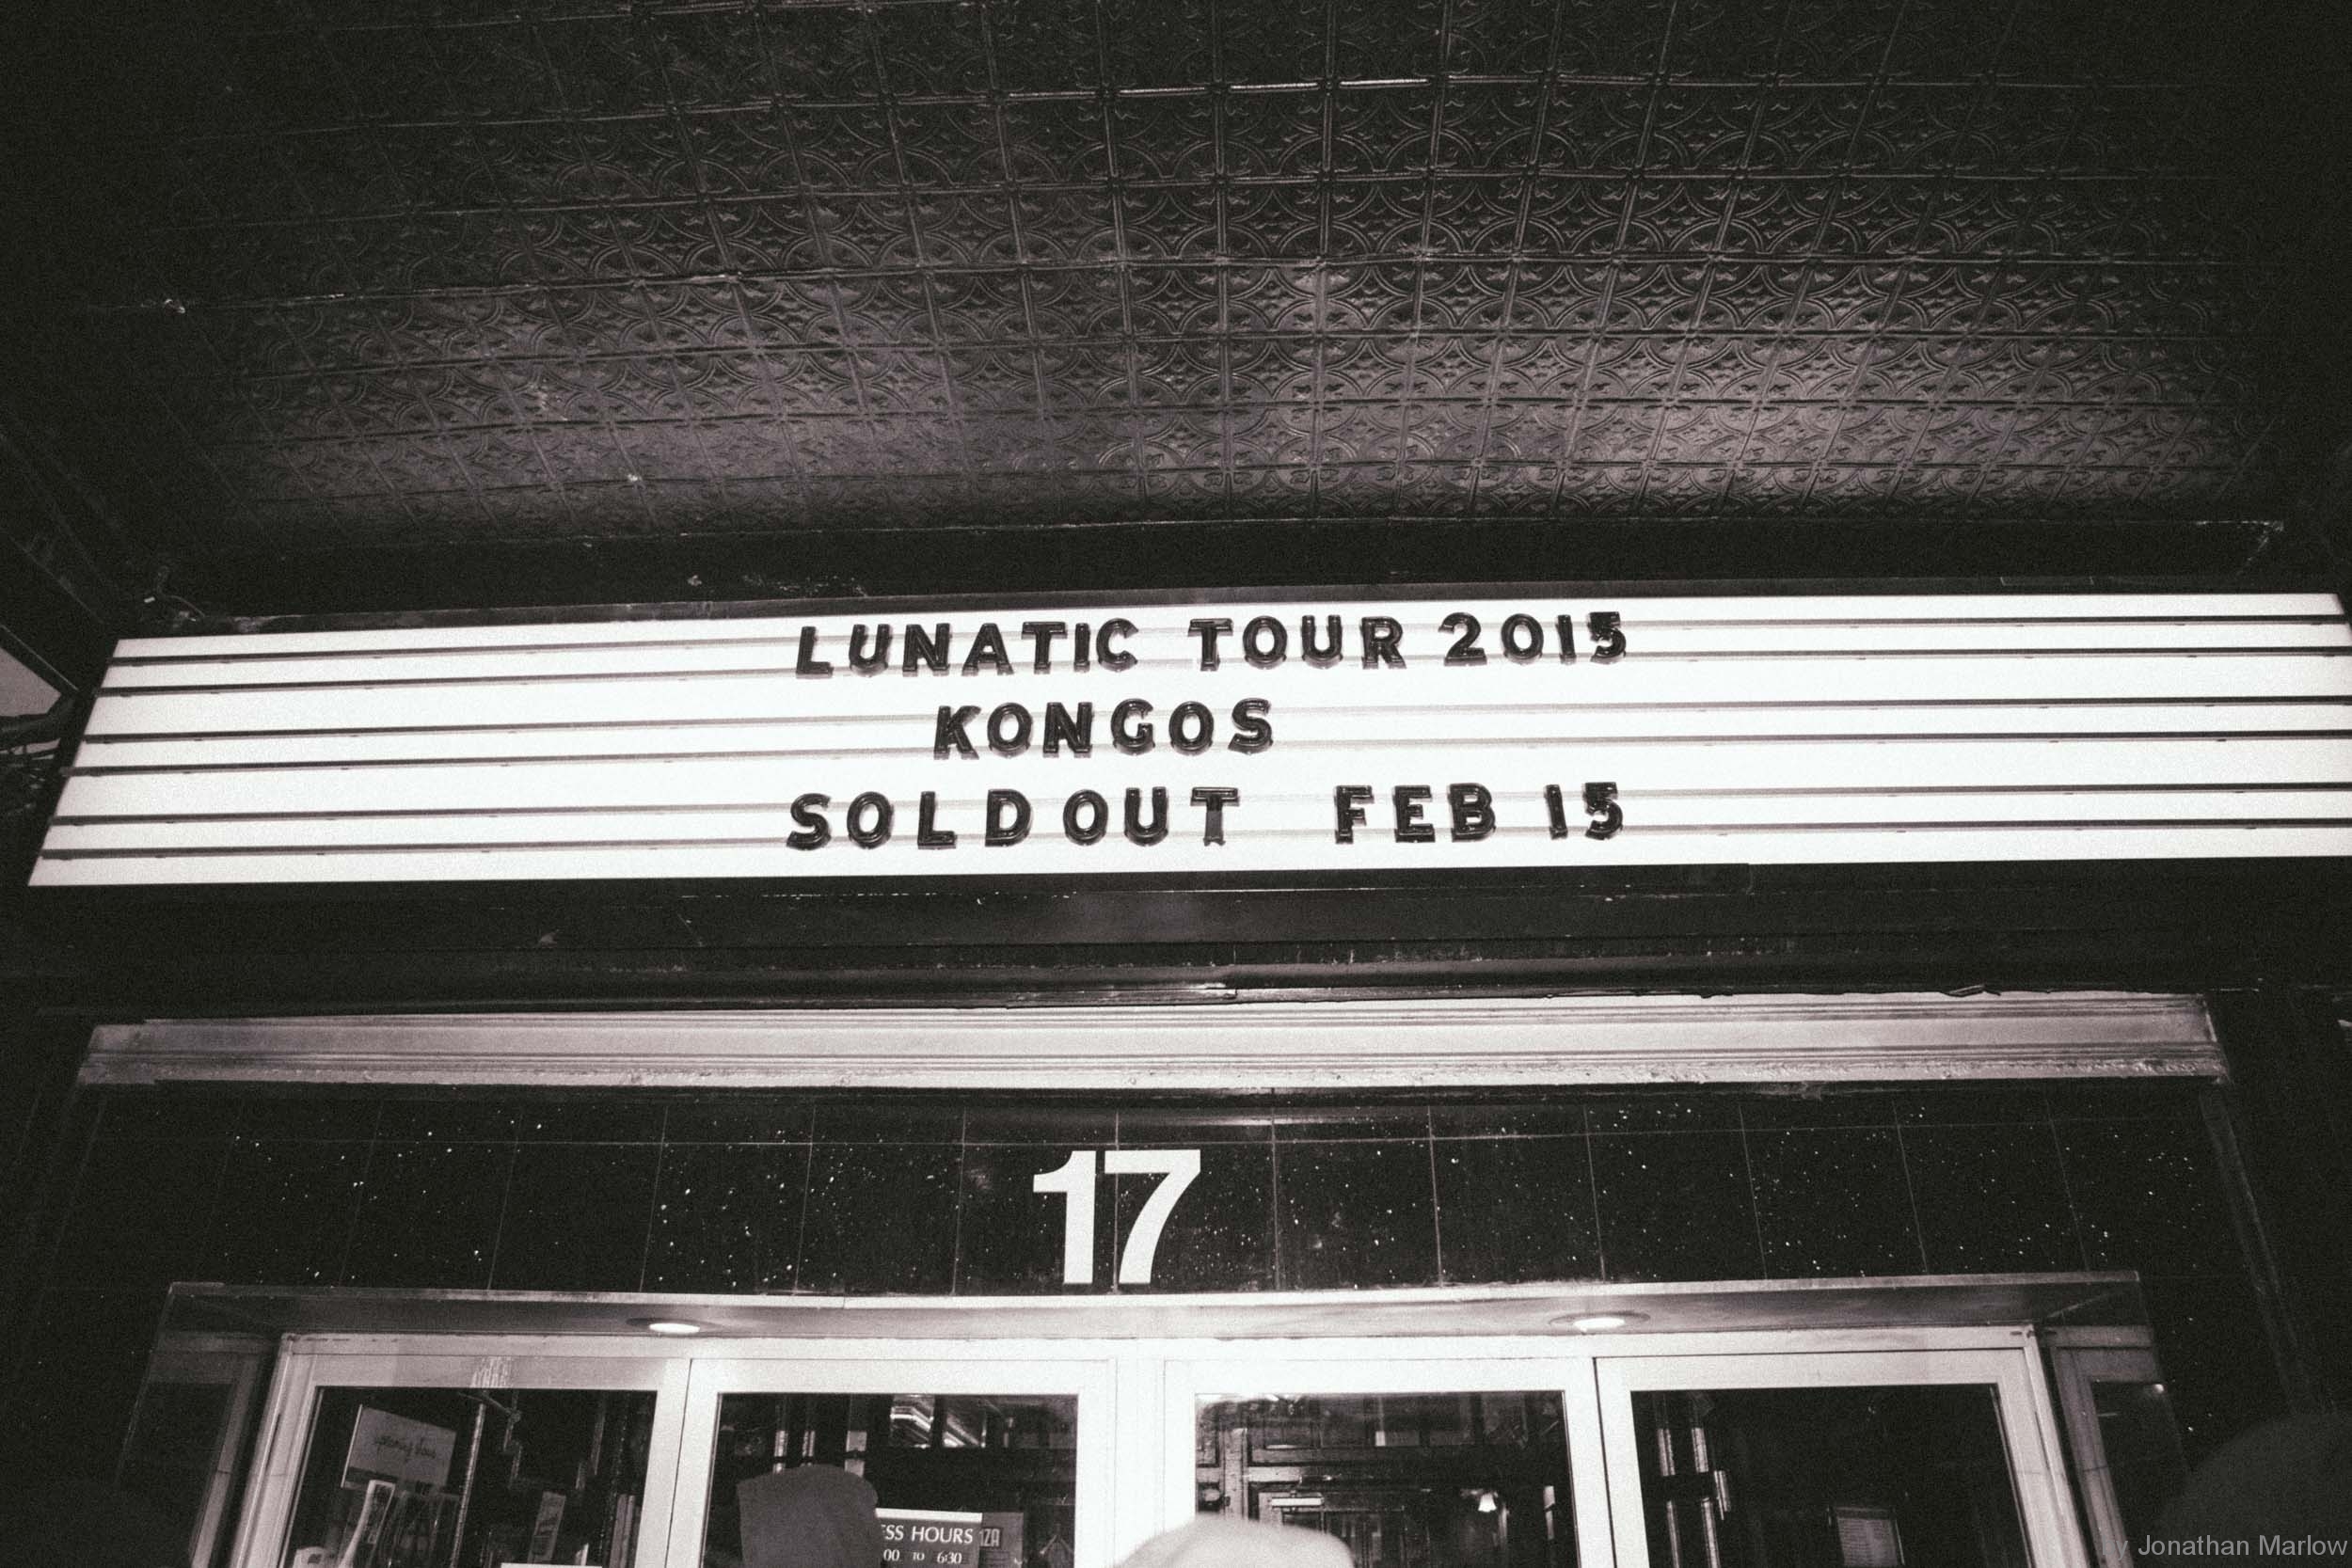 Kongos Lunatic Tour New York City Irving Plaza "Sold Out"